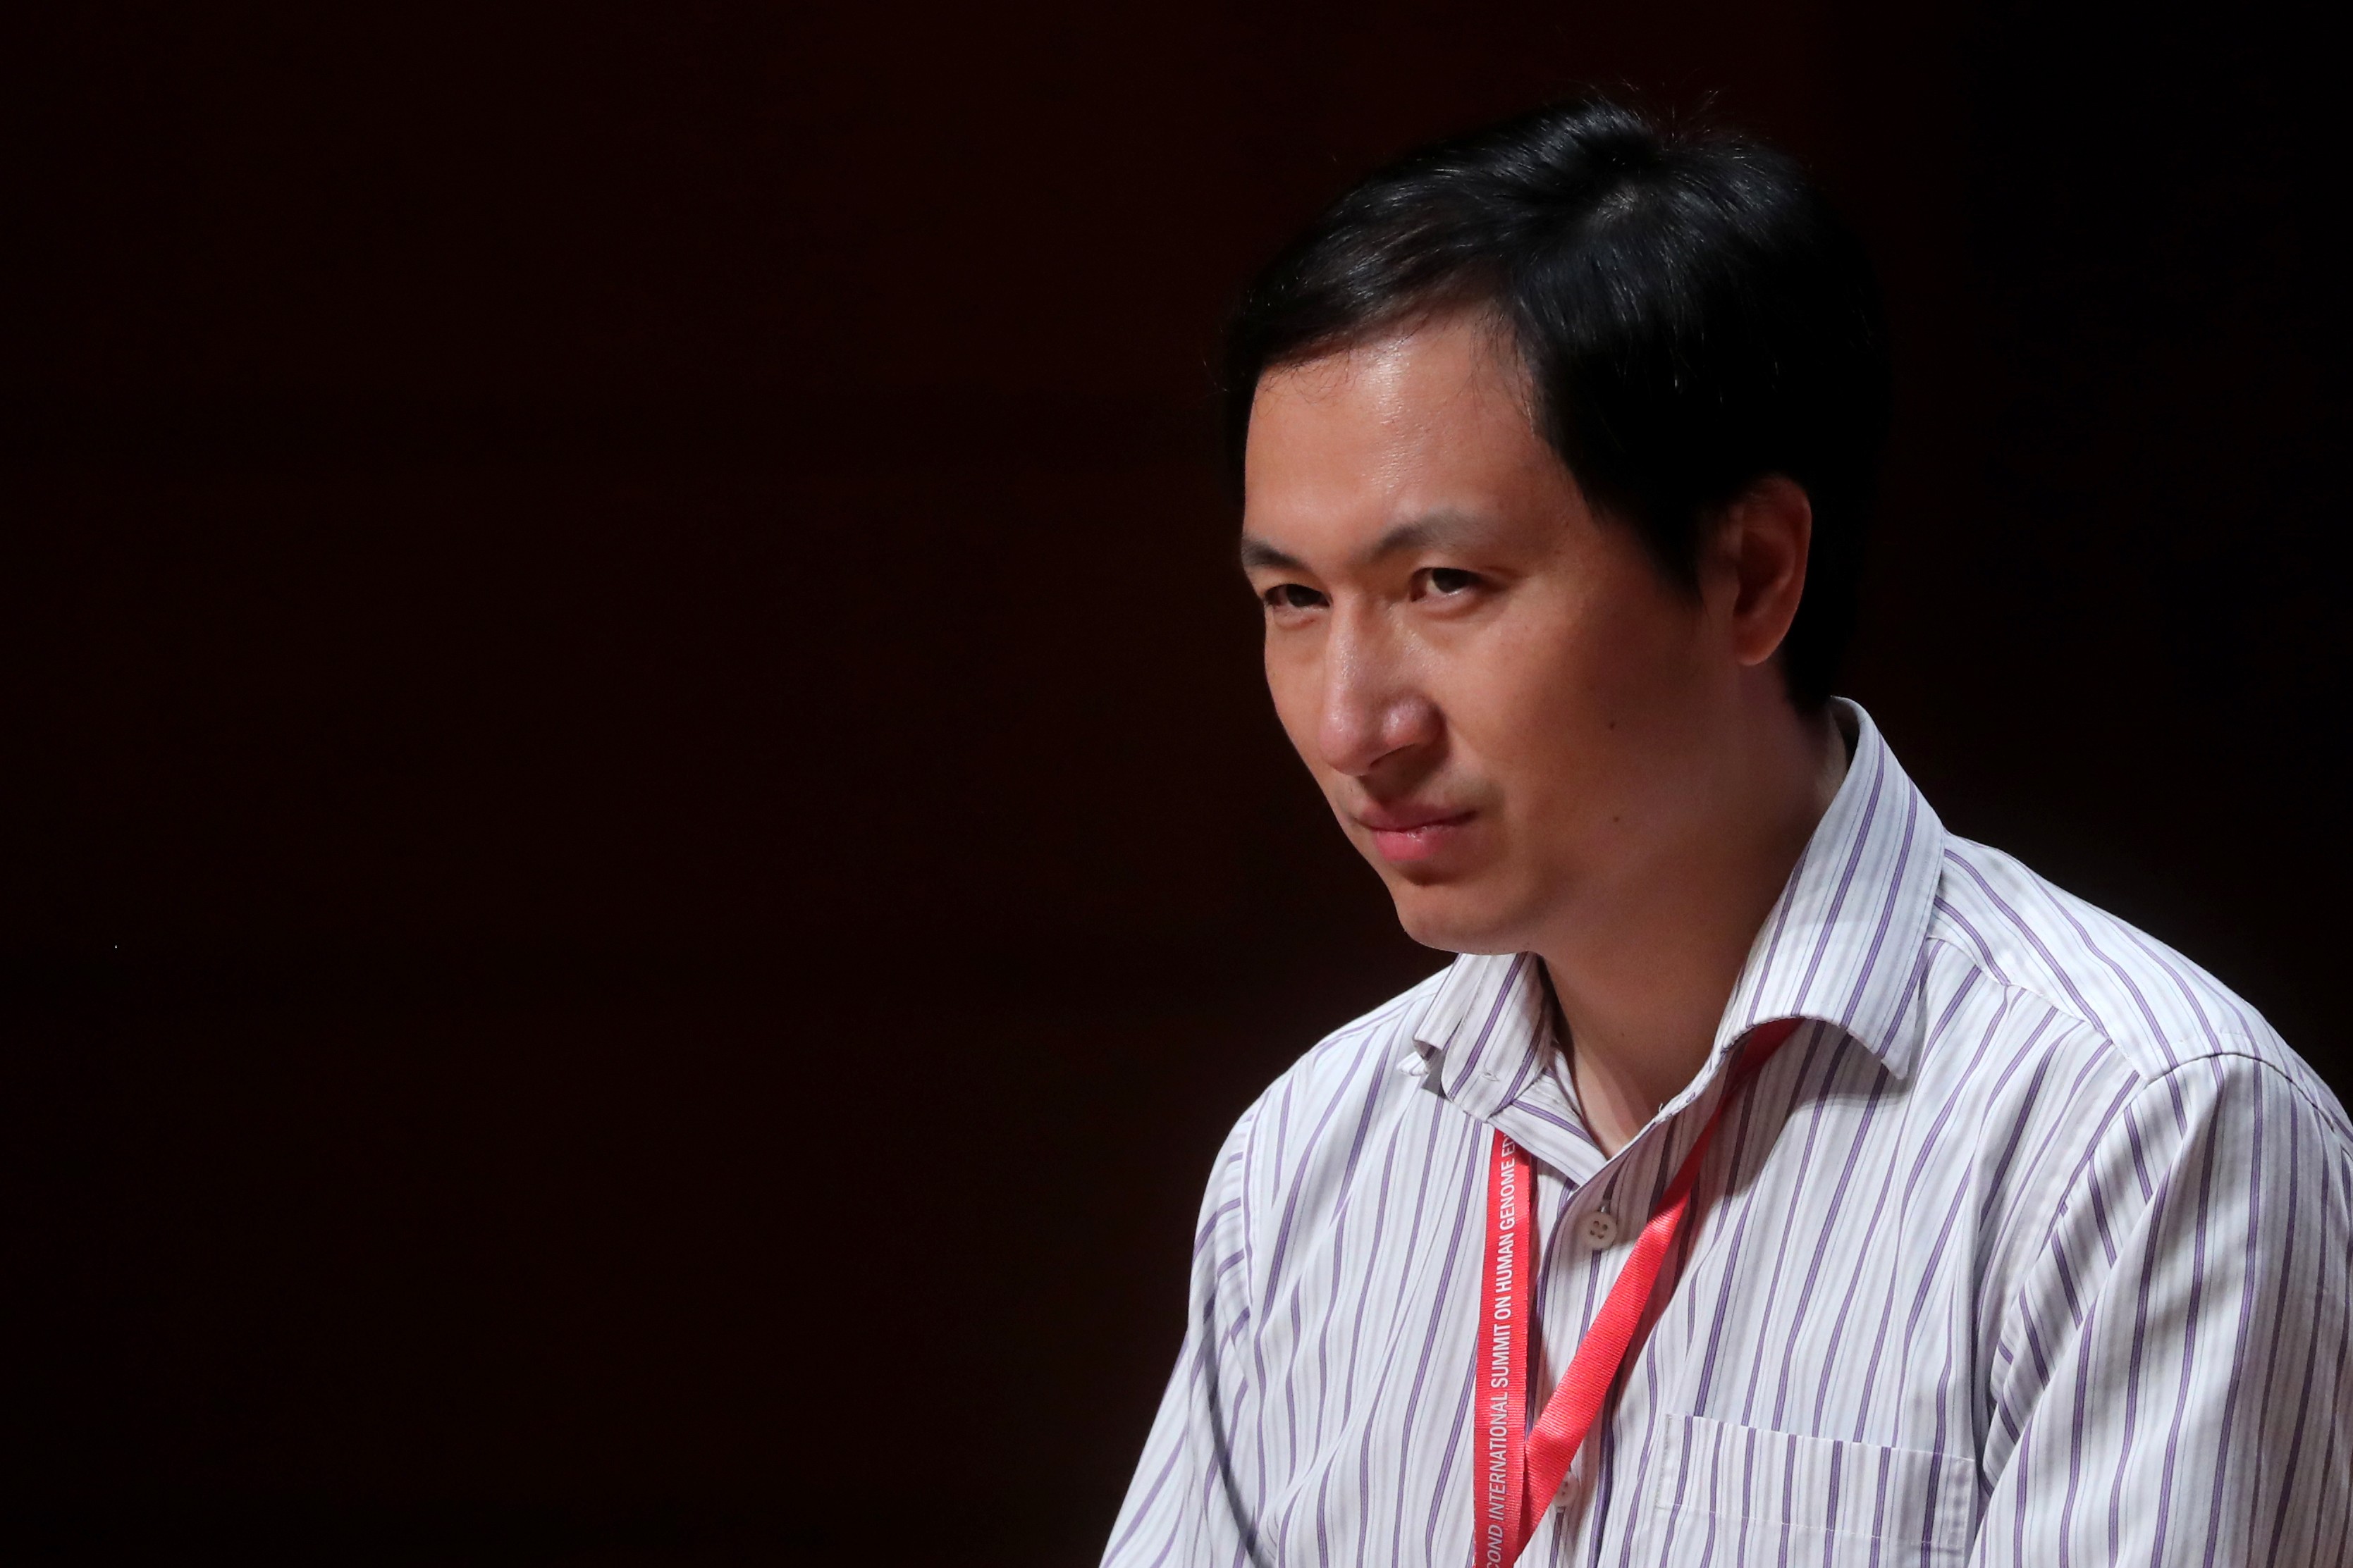 Chinese biologist He Jiankui delivers a speech at the Second International Summit on Human Genome Editing at Hong Kong University last month, shortly after his claims that the genes of two girls had been altered to ‘edit’ HIV inherited from their father. Photo: Sam Tsang